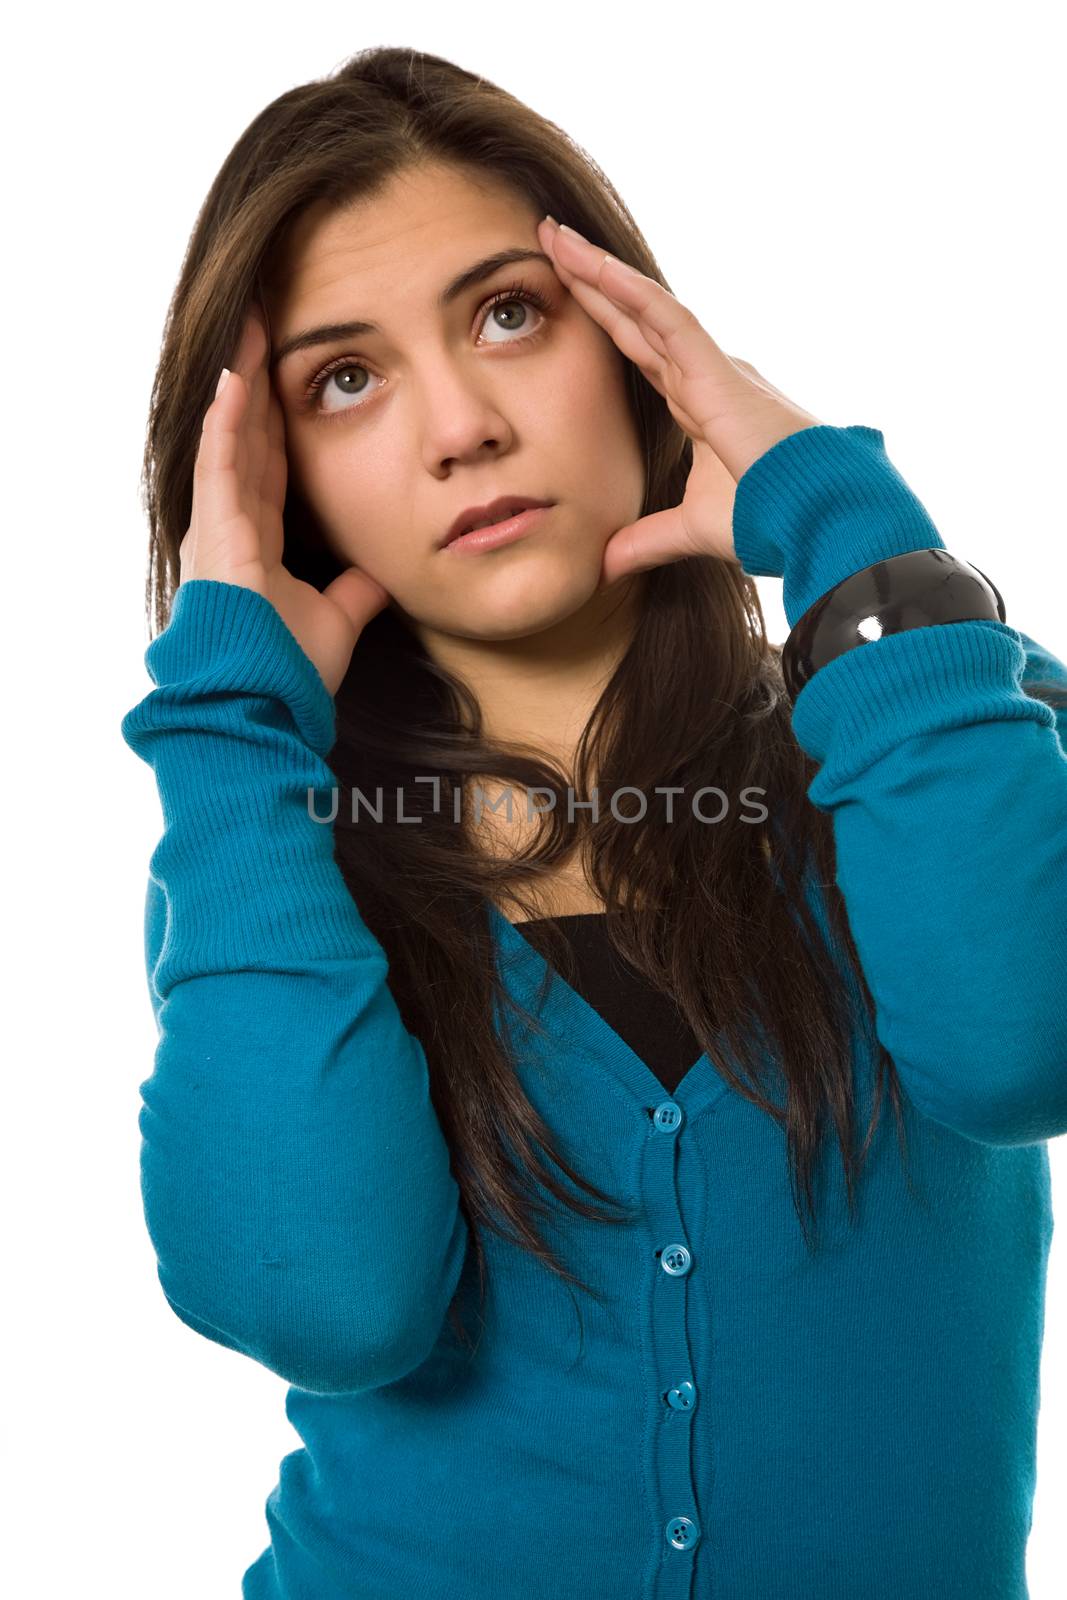 young casual woman portrait with a headache